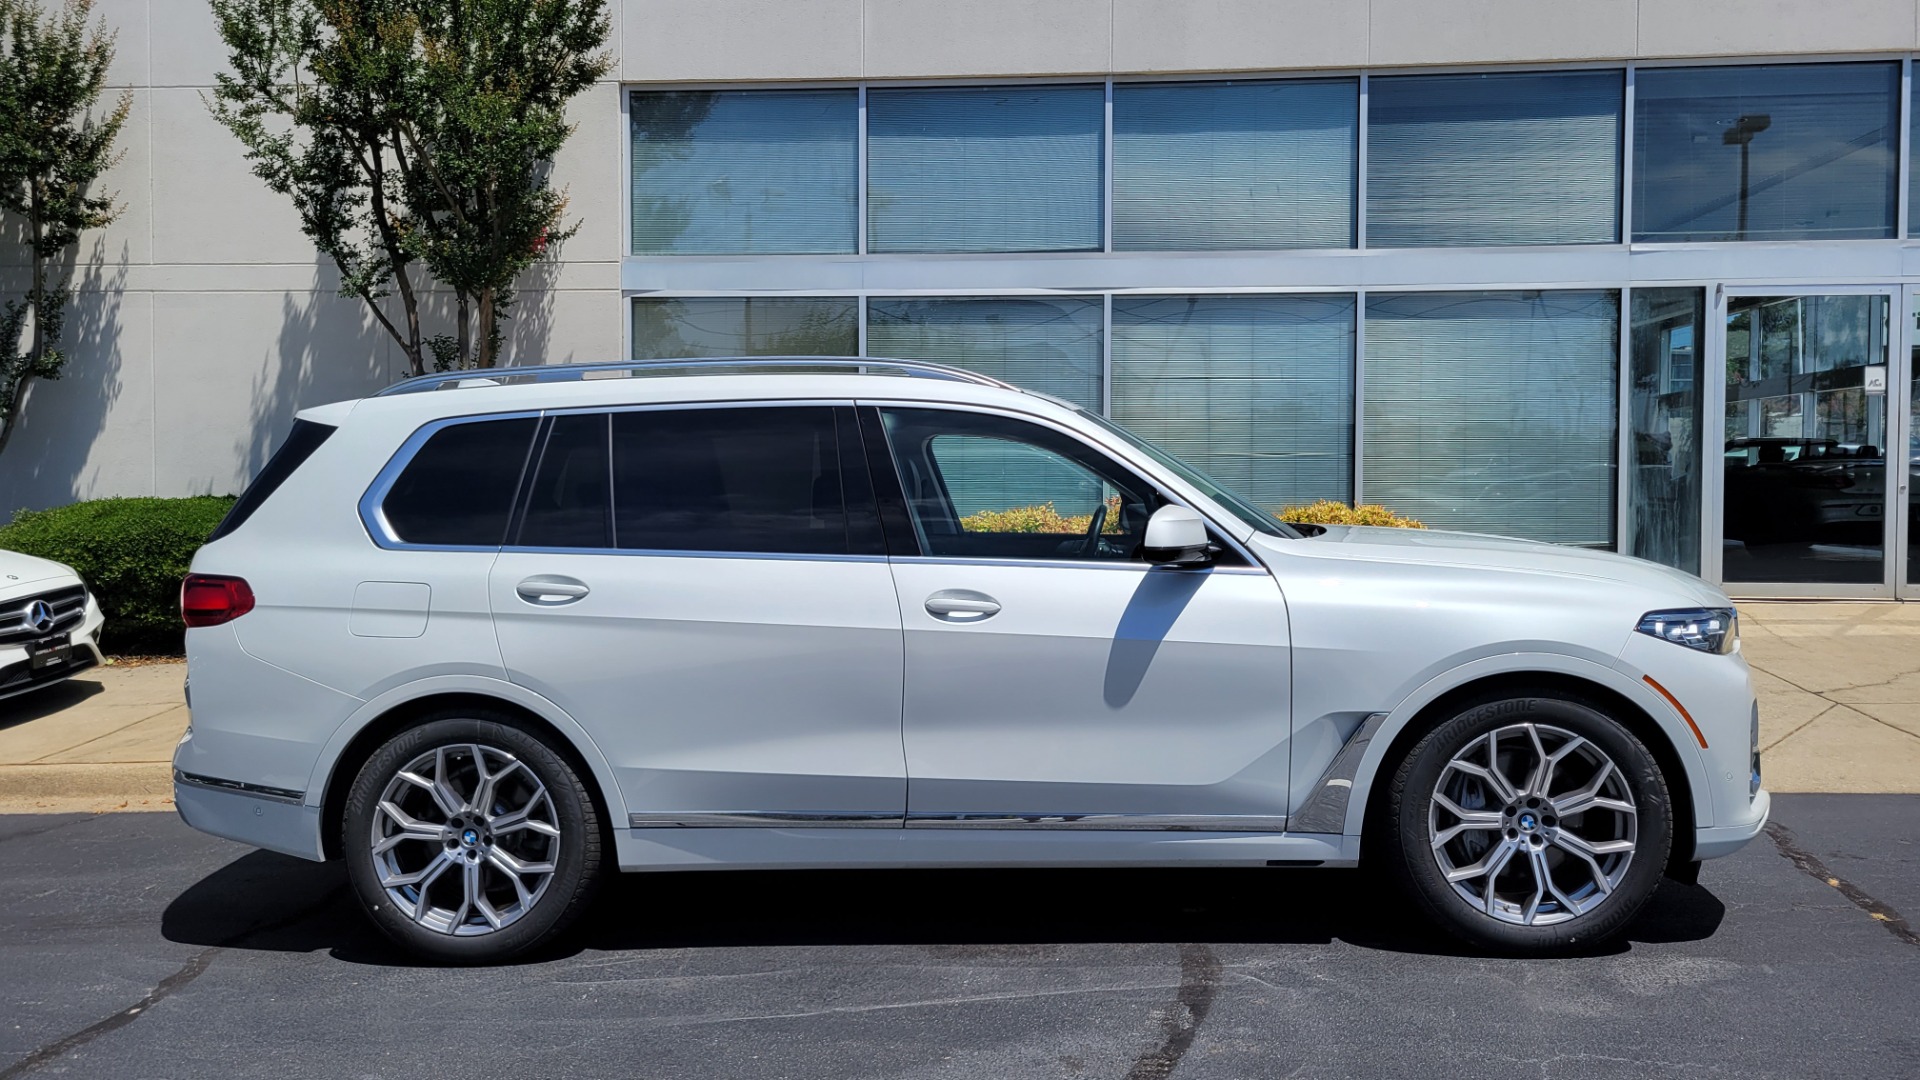 Used 2019 BMW X7 XDRIVE40I PREMIUM / NAV / HUD / PARK ASST PLUS / REMOTE START / 3D VIEW for sale $71,095 at Formula Imports in Charlotte NC 28227 6